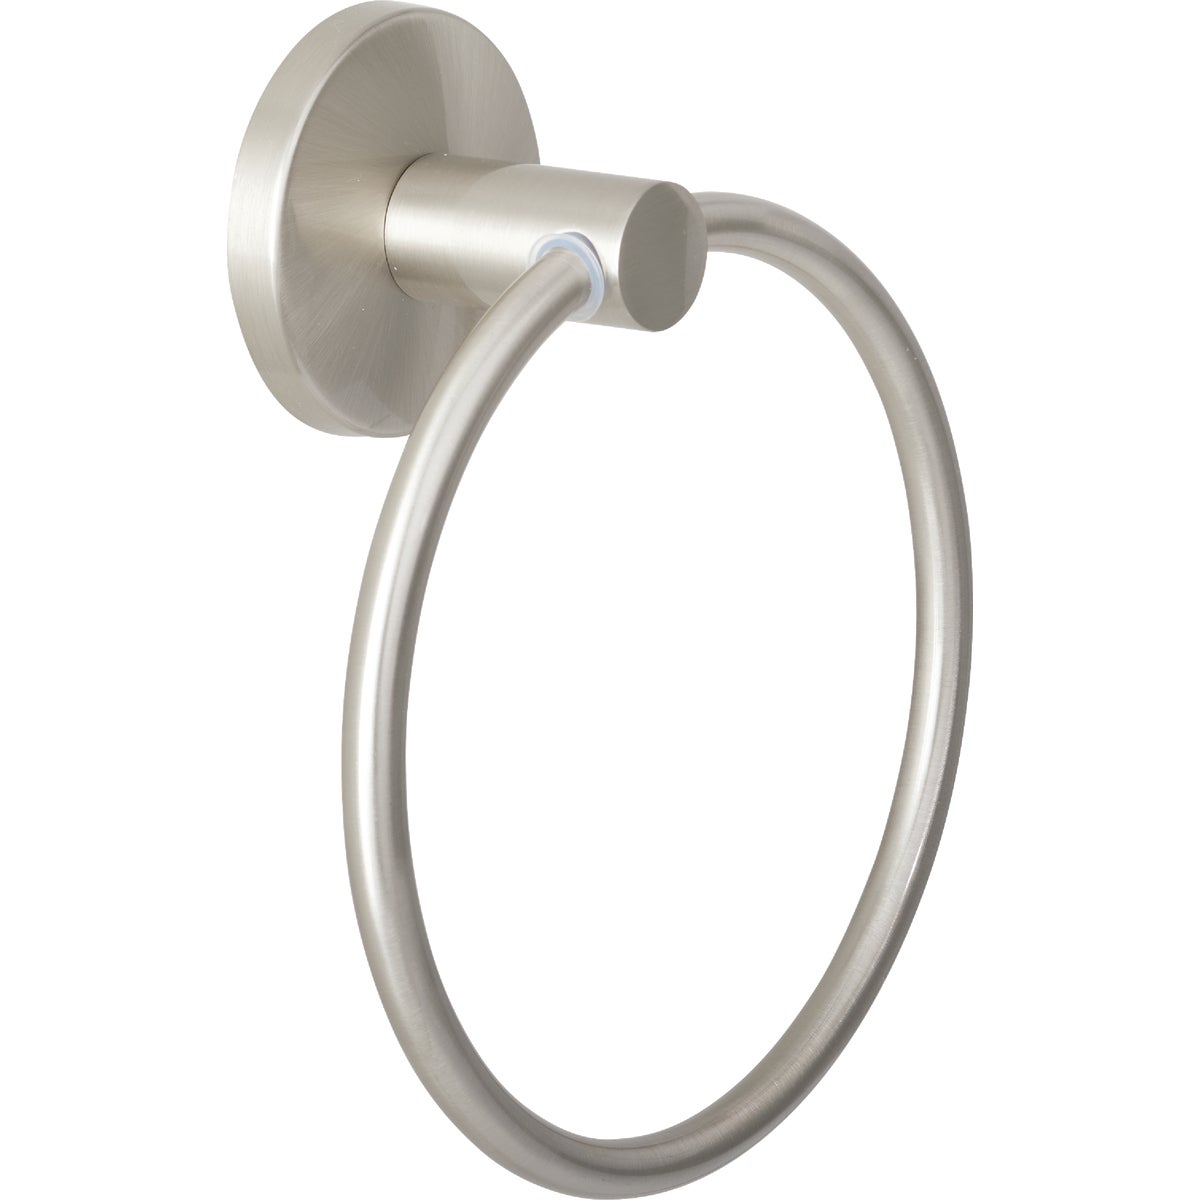 Home Impressions Triton Brushed Nickel Towel Ring